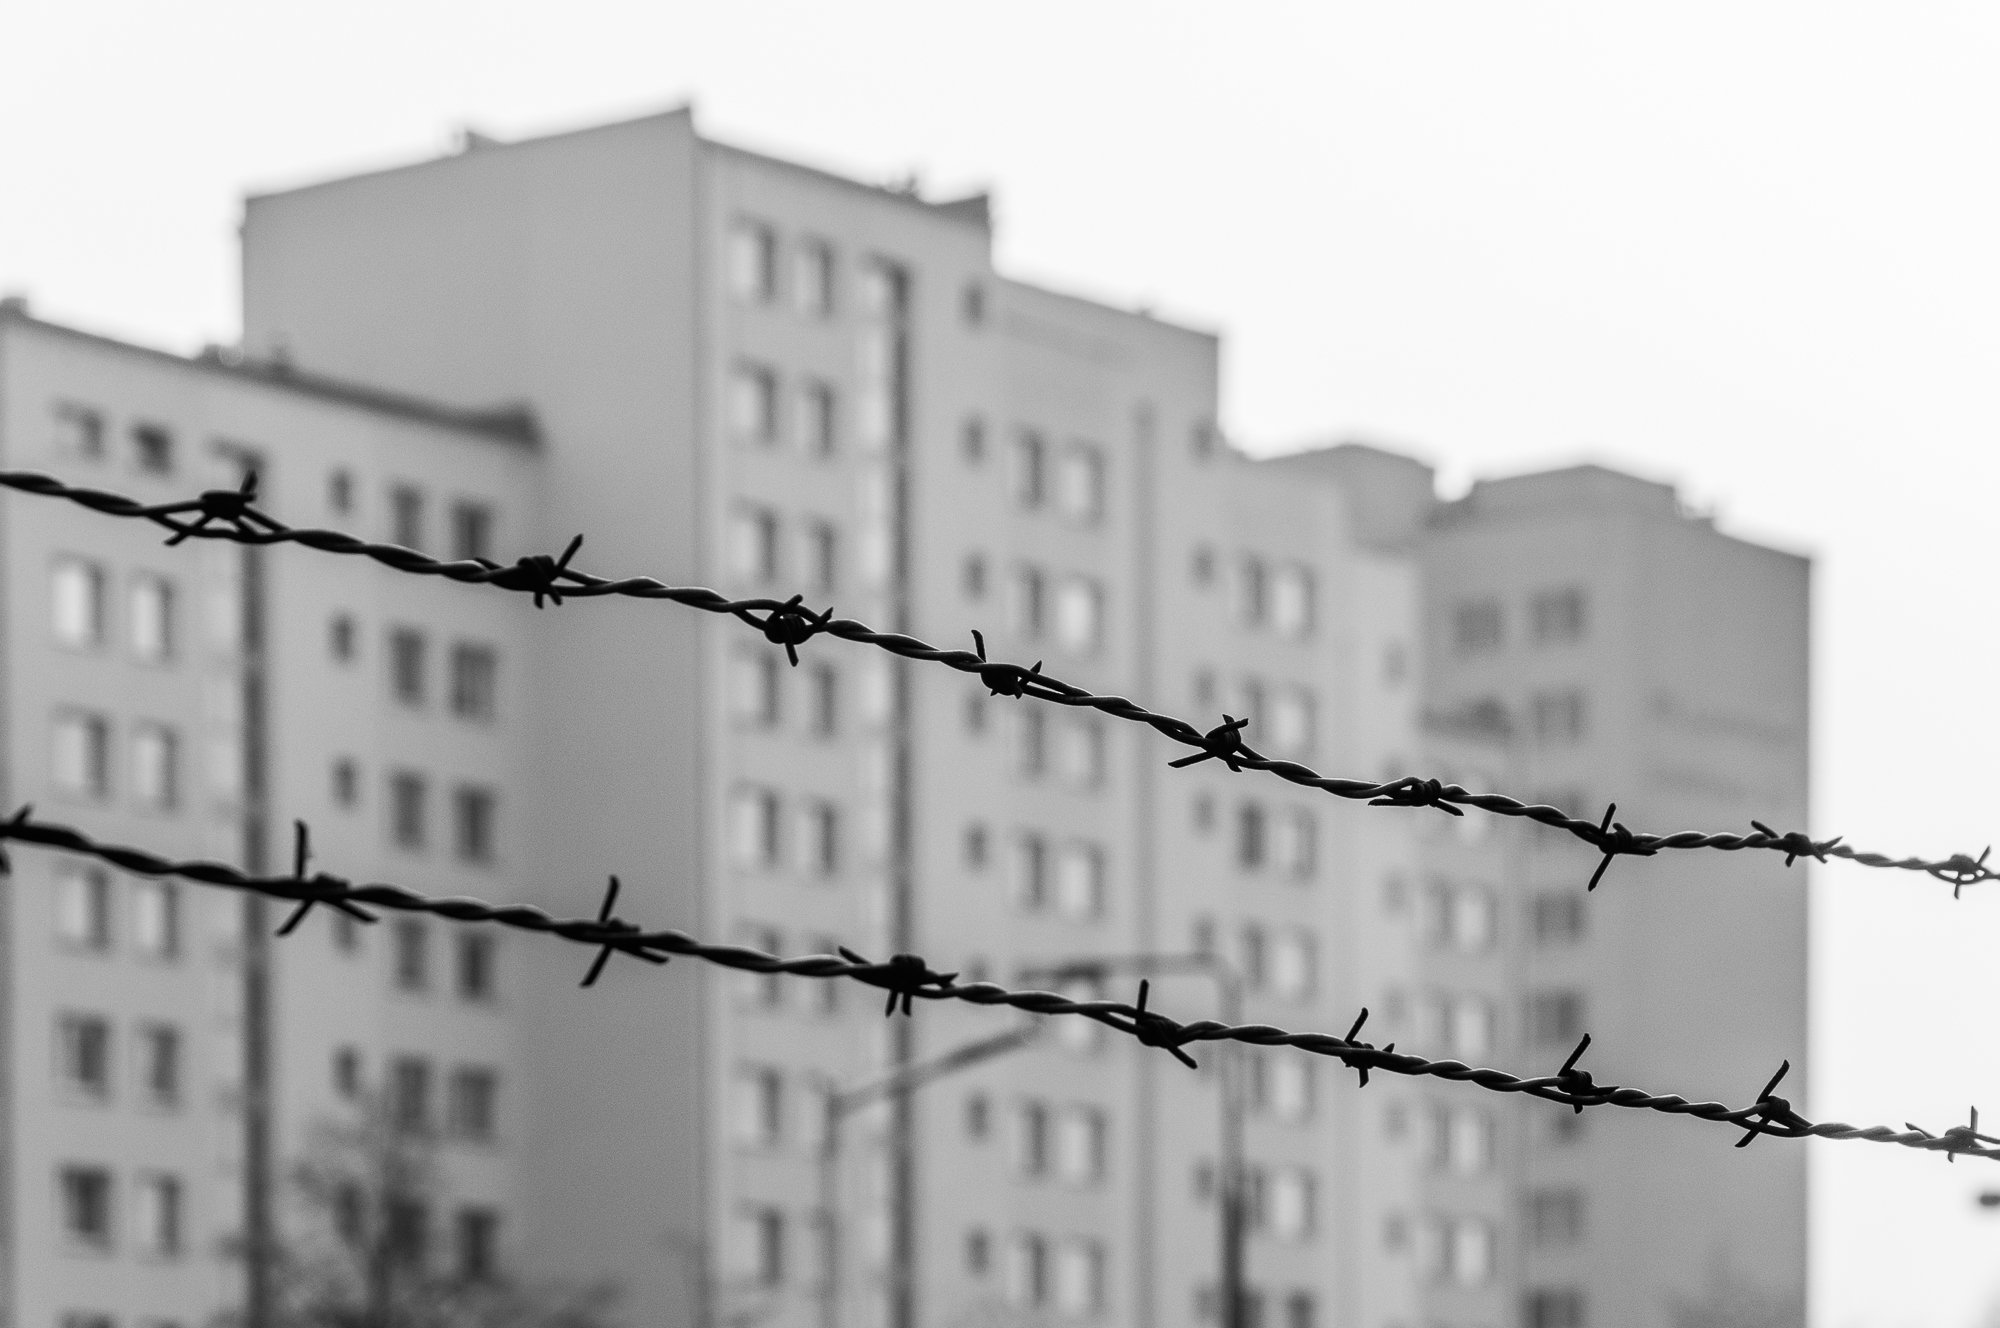 Adam Mazek Photography Warsaw 2021. Post: "How to sleep correctly?" Perspective. Barbed wire. Block of flats.